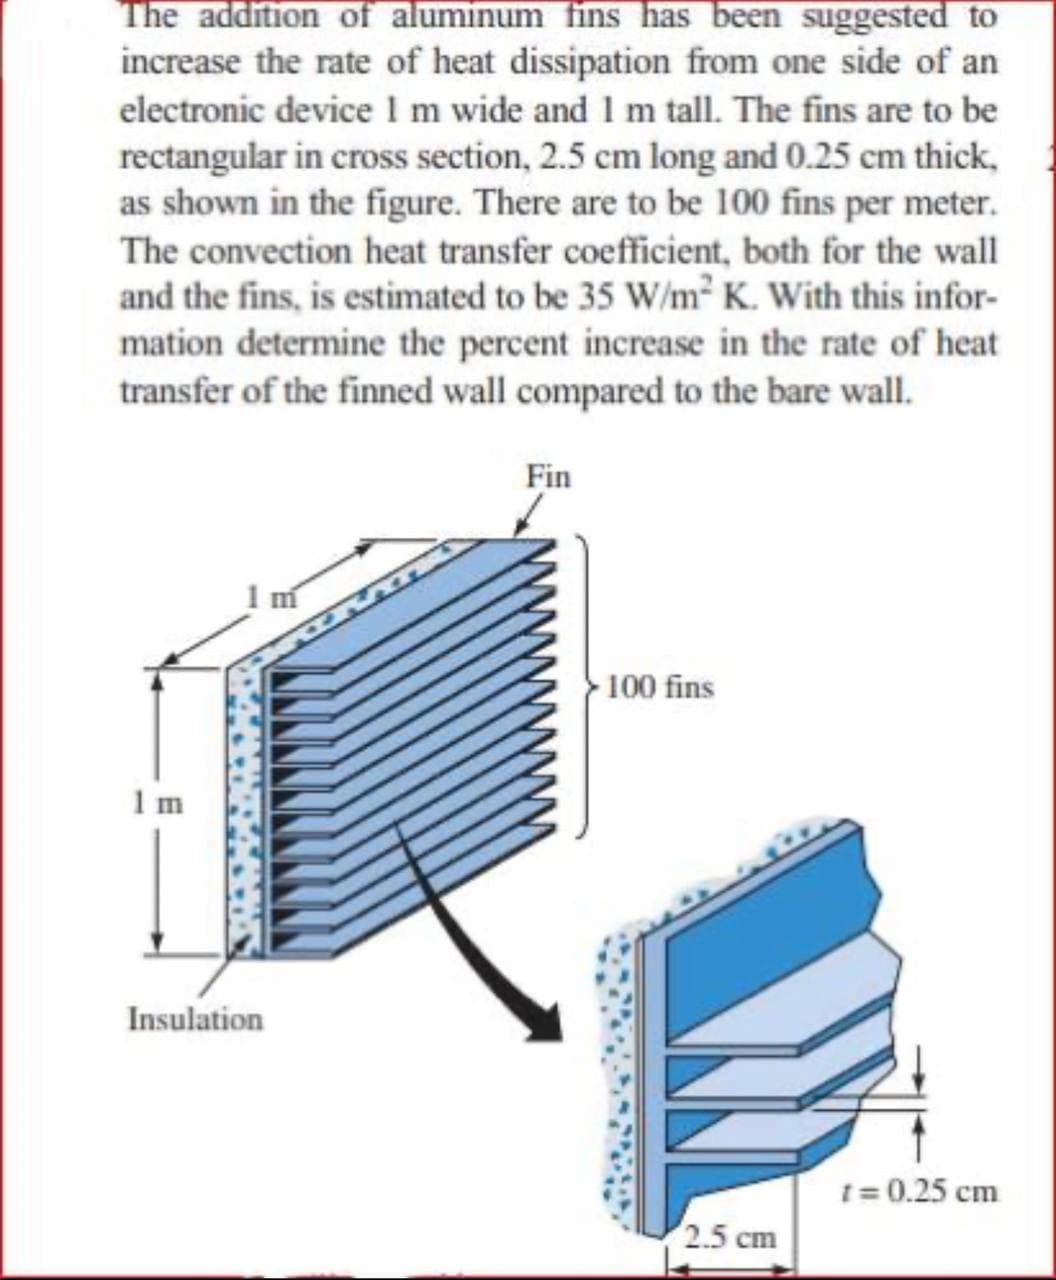 The addition of aluminum fins has been suggested to
increase the rate of heat dissipation from one side of an
electronic device 1 m wide and 1 m tall. The fins are to be
rectangular in cross section, 2.5 cm long and 0.25 cm thick,
as shown in the figure. There are to be 100 fins per meter.
The convection heat transfer coefficient, both for the wall
and the fins, is estimated to be 35 W/m2 K. With this infor-
mation determine the percent increase in the rate of heat
transfer of the finned wall compared to the bare wall.
Fin
100 fins
1 m
Insulation
1= 0.25 cm
2.5 cm
